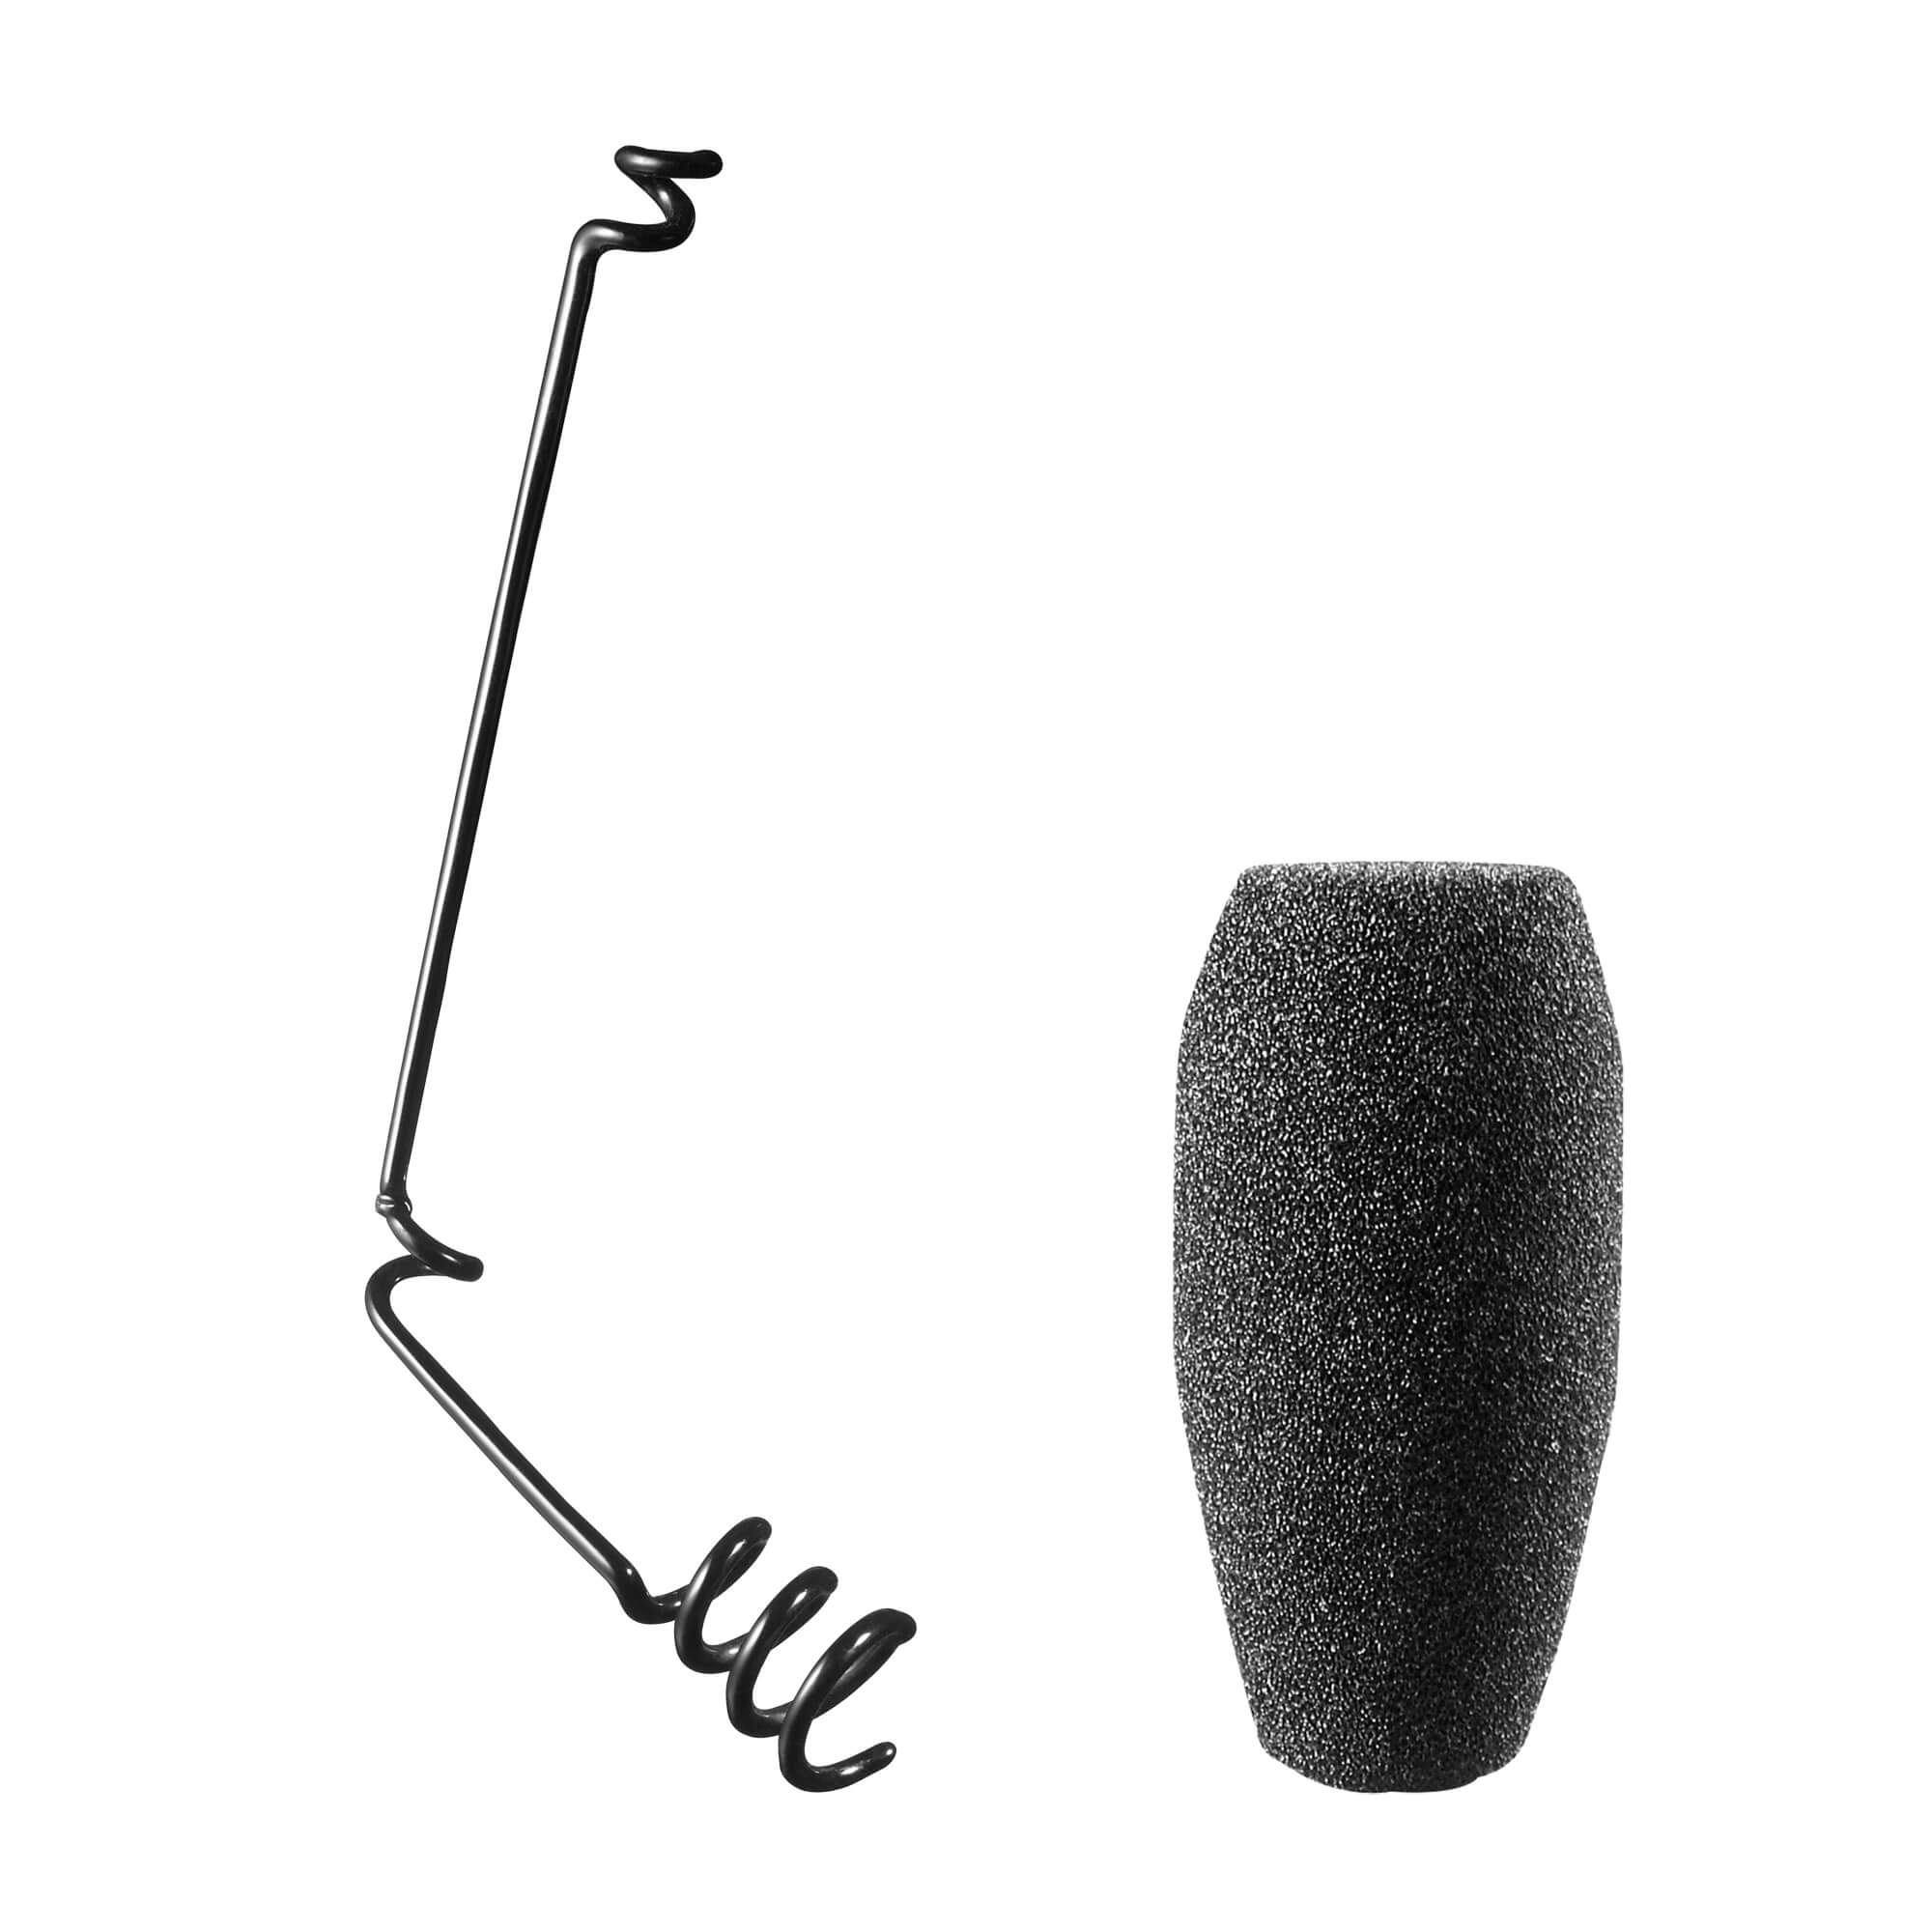 Audio-Technica PRO45 - ProPoint Cardioid Condenser Hanging Microphone, included accessories